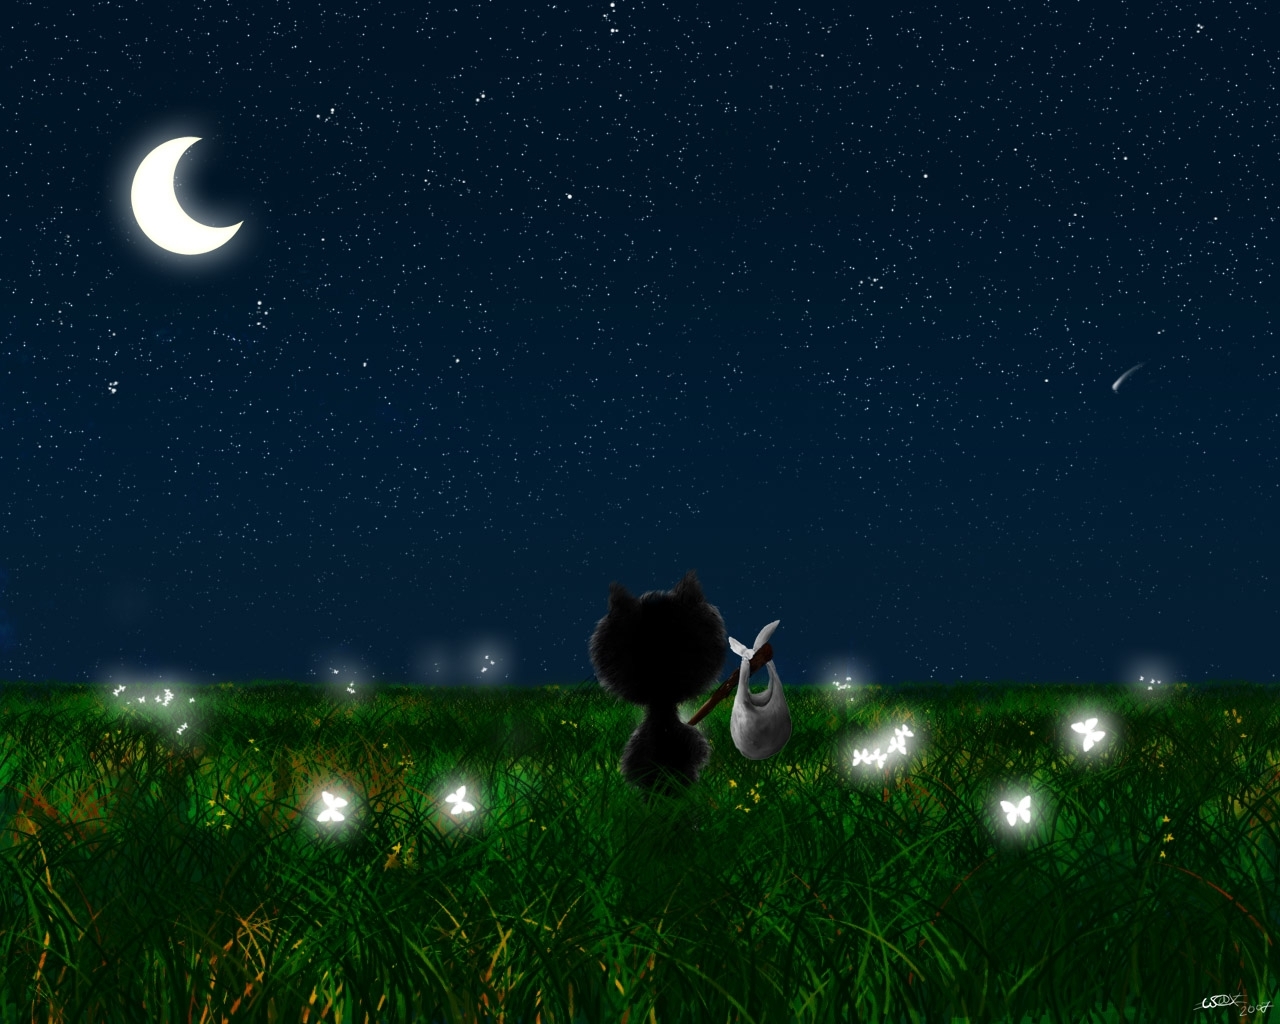 pictures, black, cats, landscape, grass, night, moon High Definition image